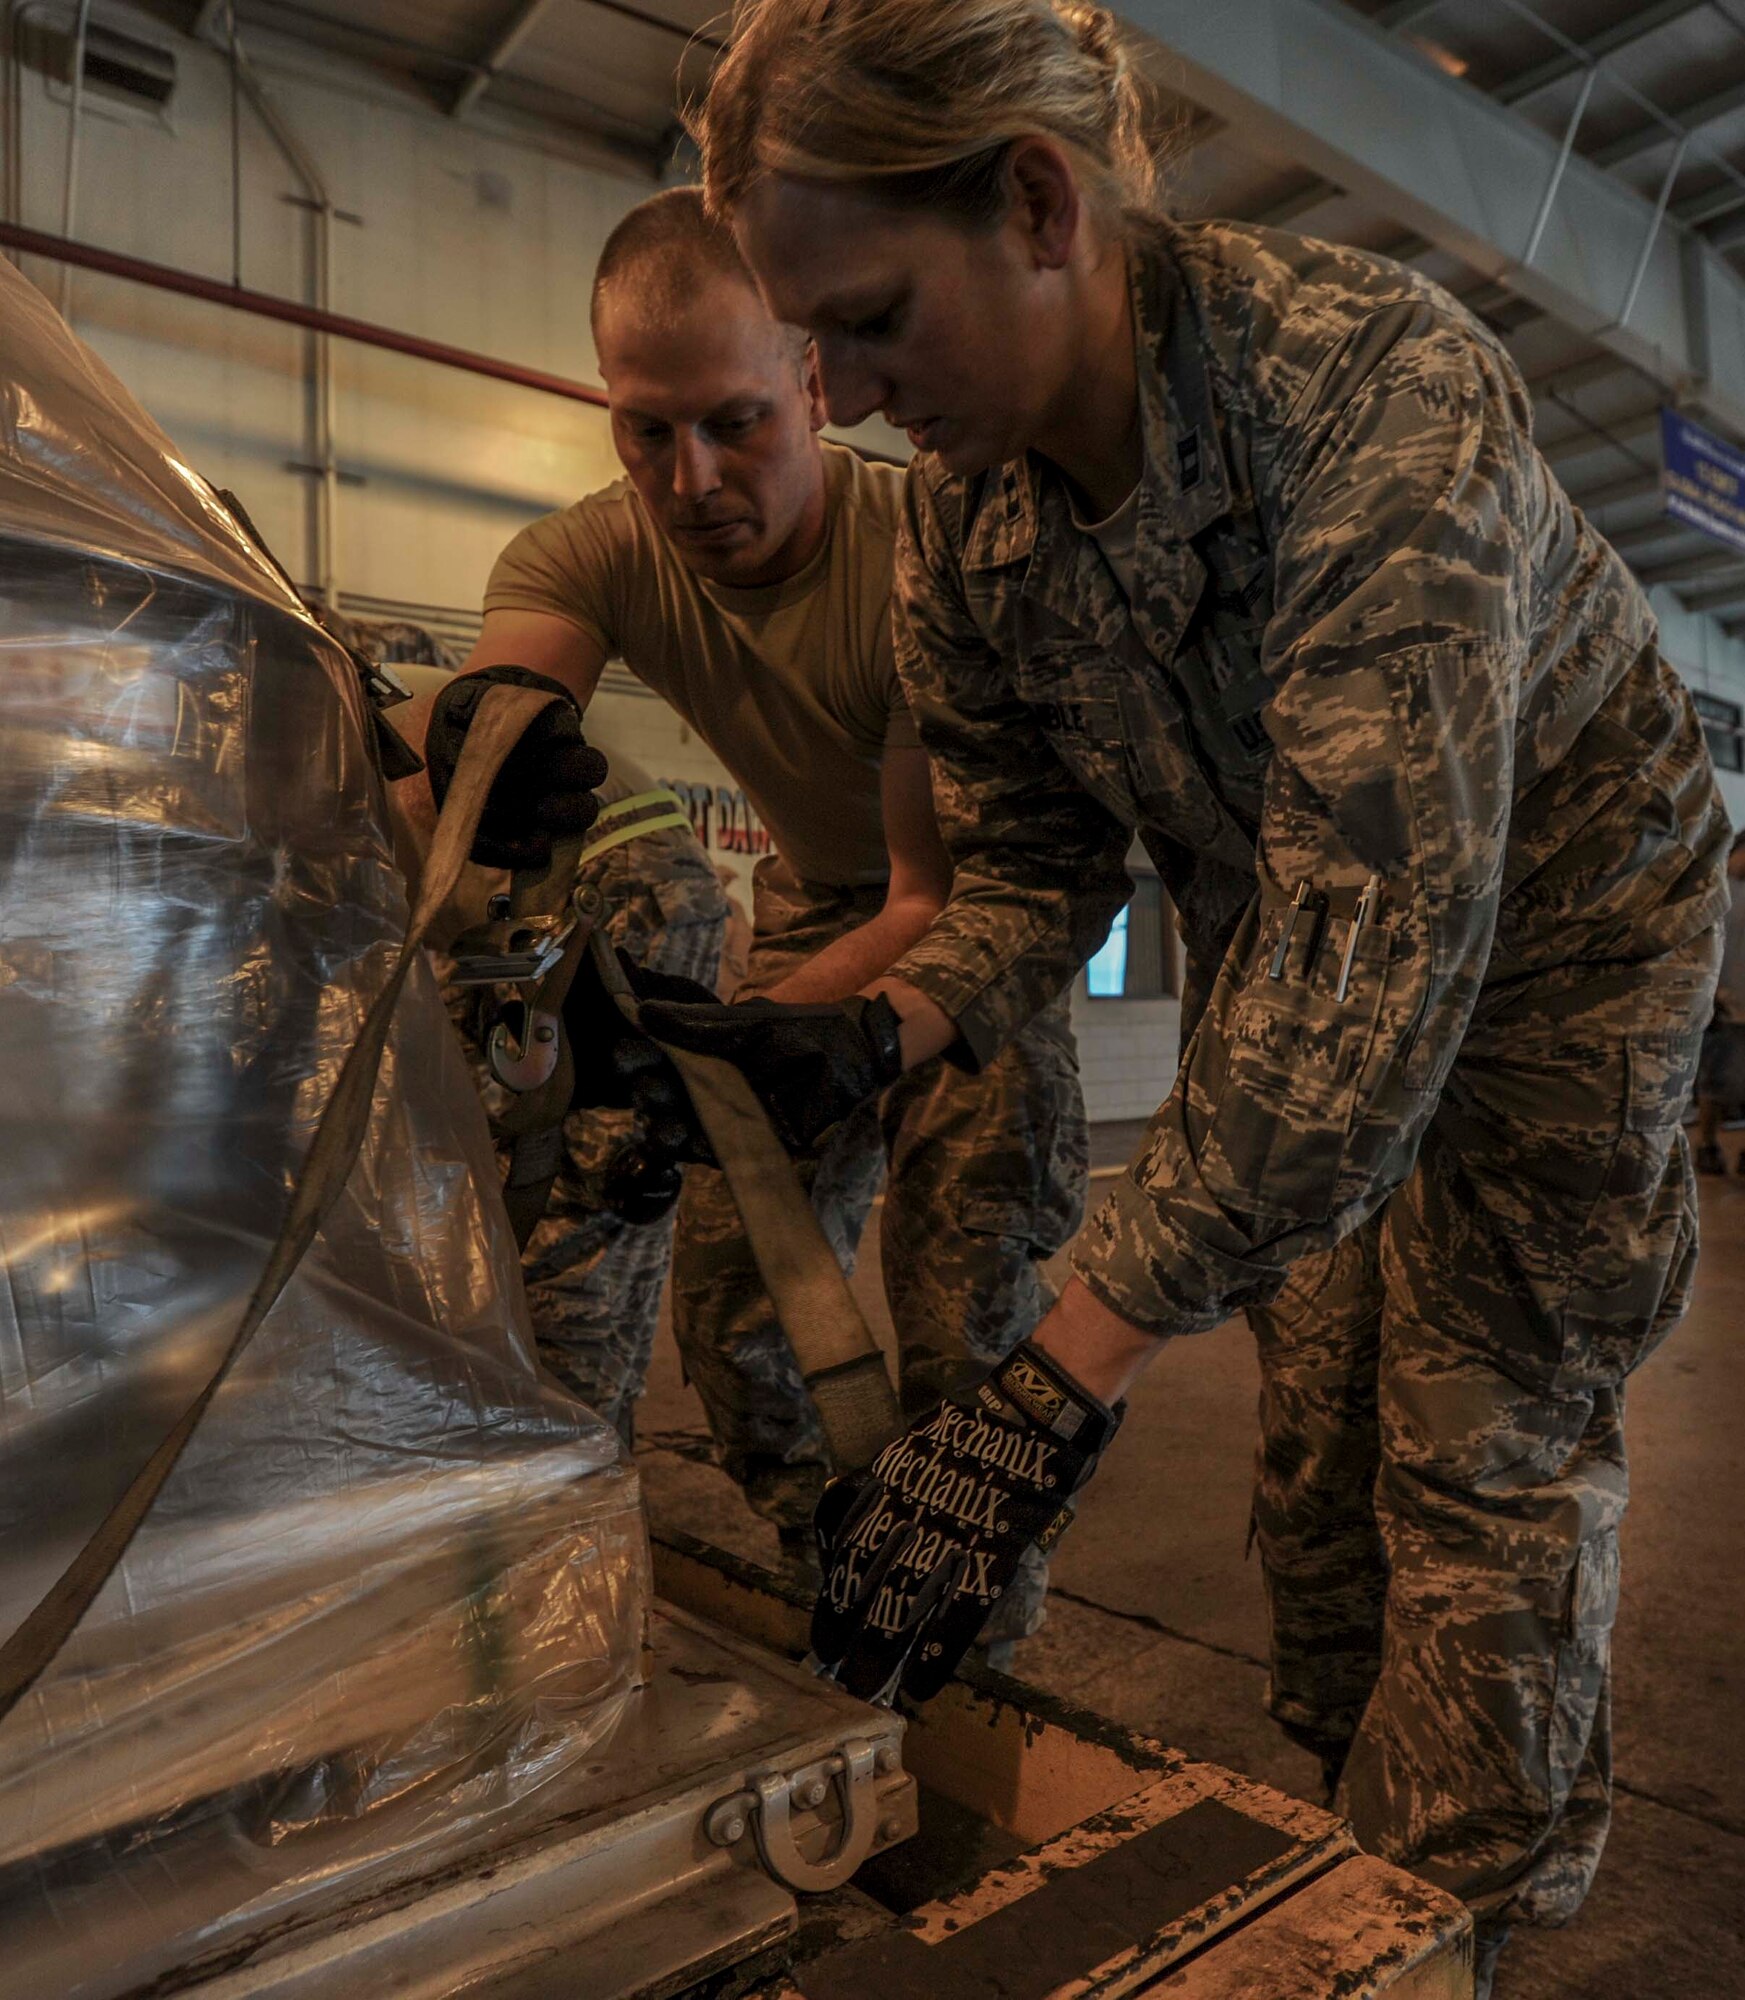 Tech. Sgt. George Welliver, 72nd Aerial Port Squadron cargo journeyman, left, shows Capt. Kelly Womble, 15th Maintenance Squadron Maintenance Flight commander, the tighten procedures for belly bands during a demonstration of palette buildup at the 735th Air Mobility Squadron Aerial Port at Joint Base Pearl Harbor-Hickam, Hawaii, Jan. 29, 2015. (U.S. Air Force photo by Tech. Sgt. Terri Paden)